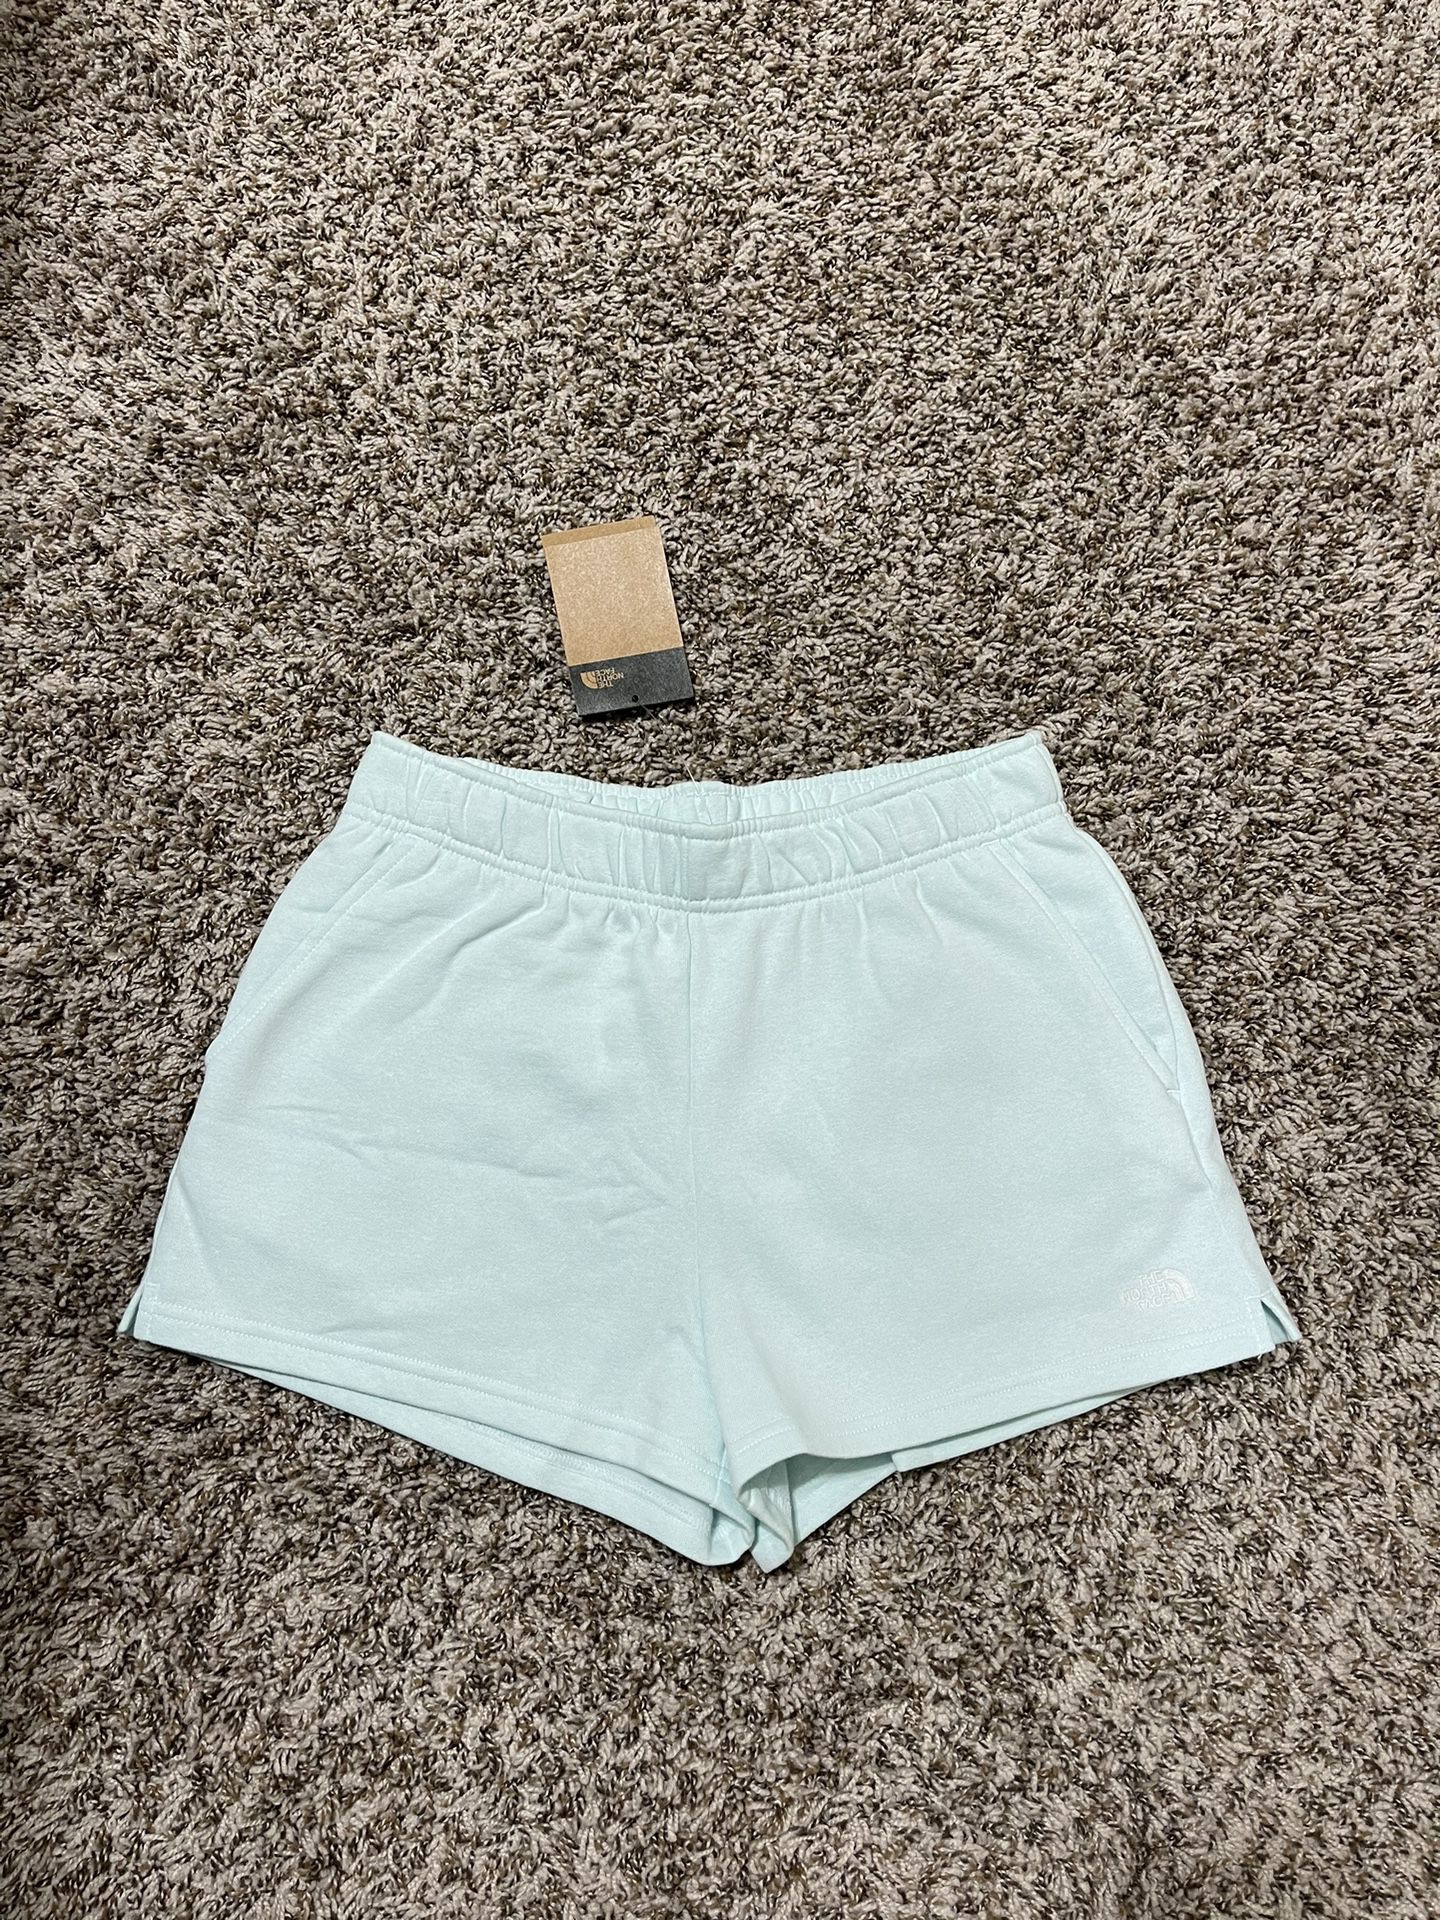 Womens The North Face Fleece Shorts